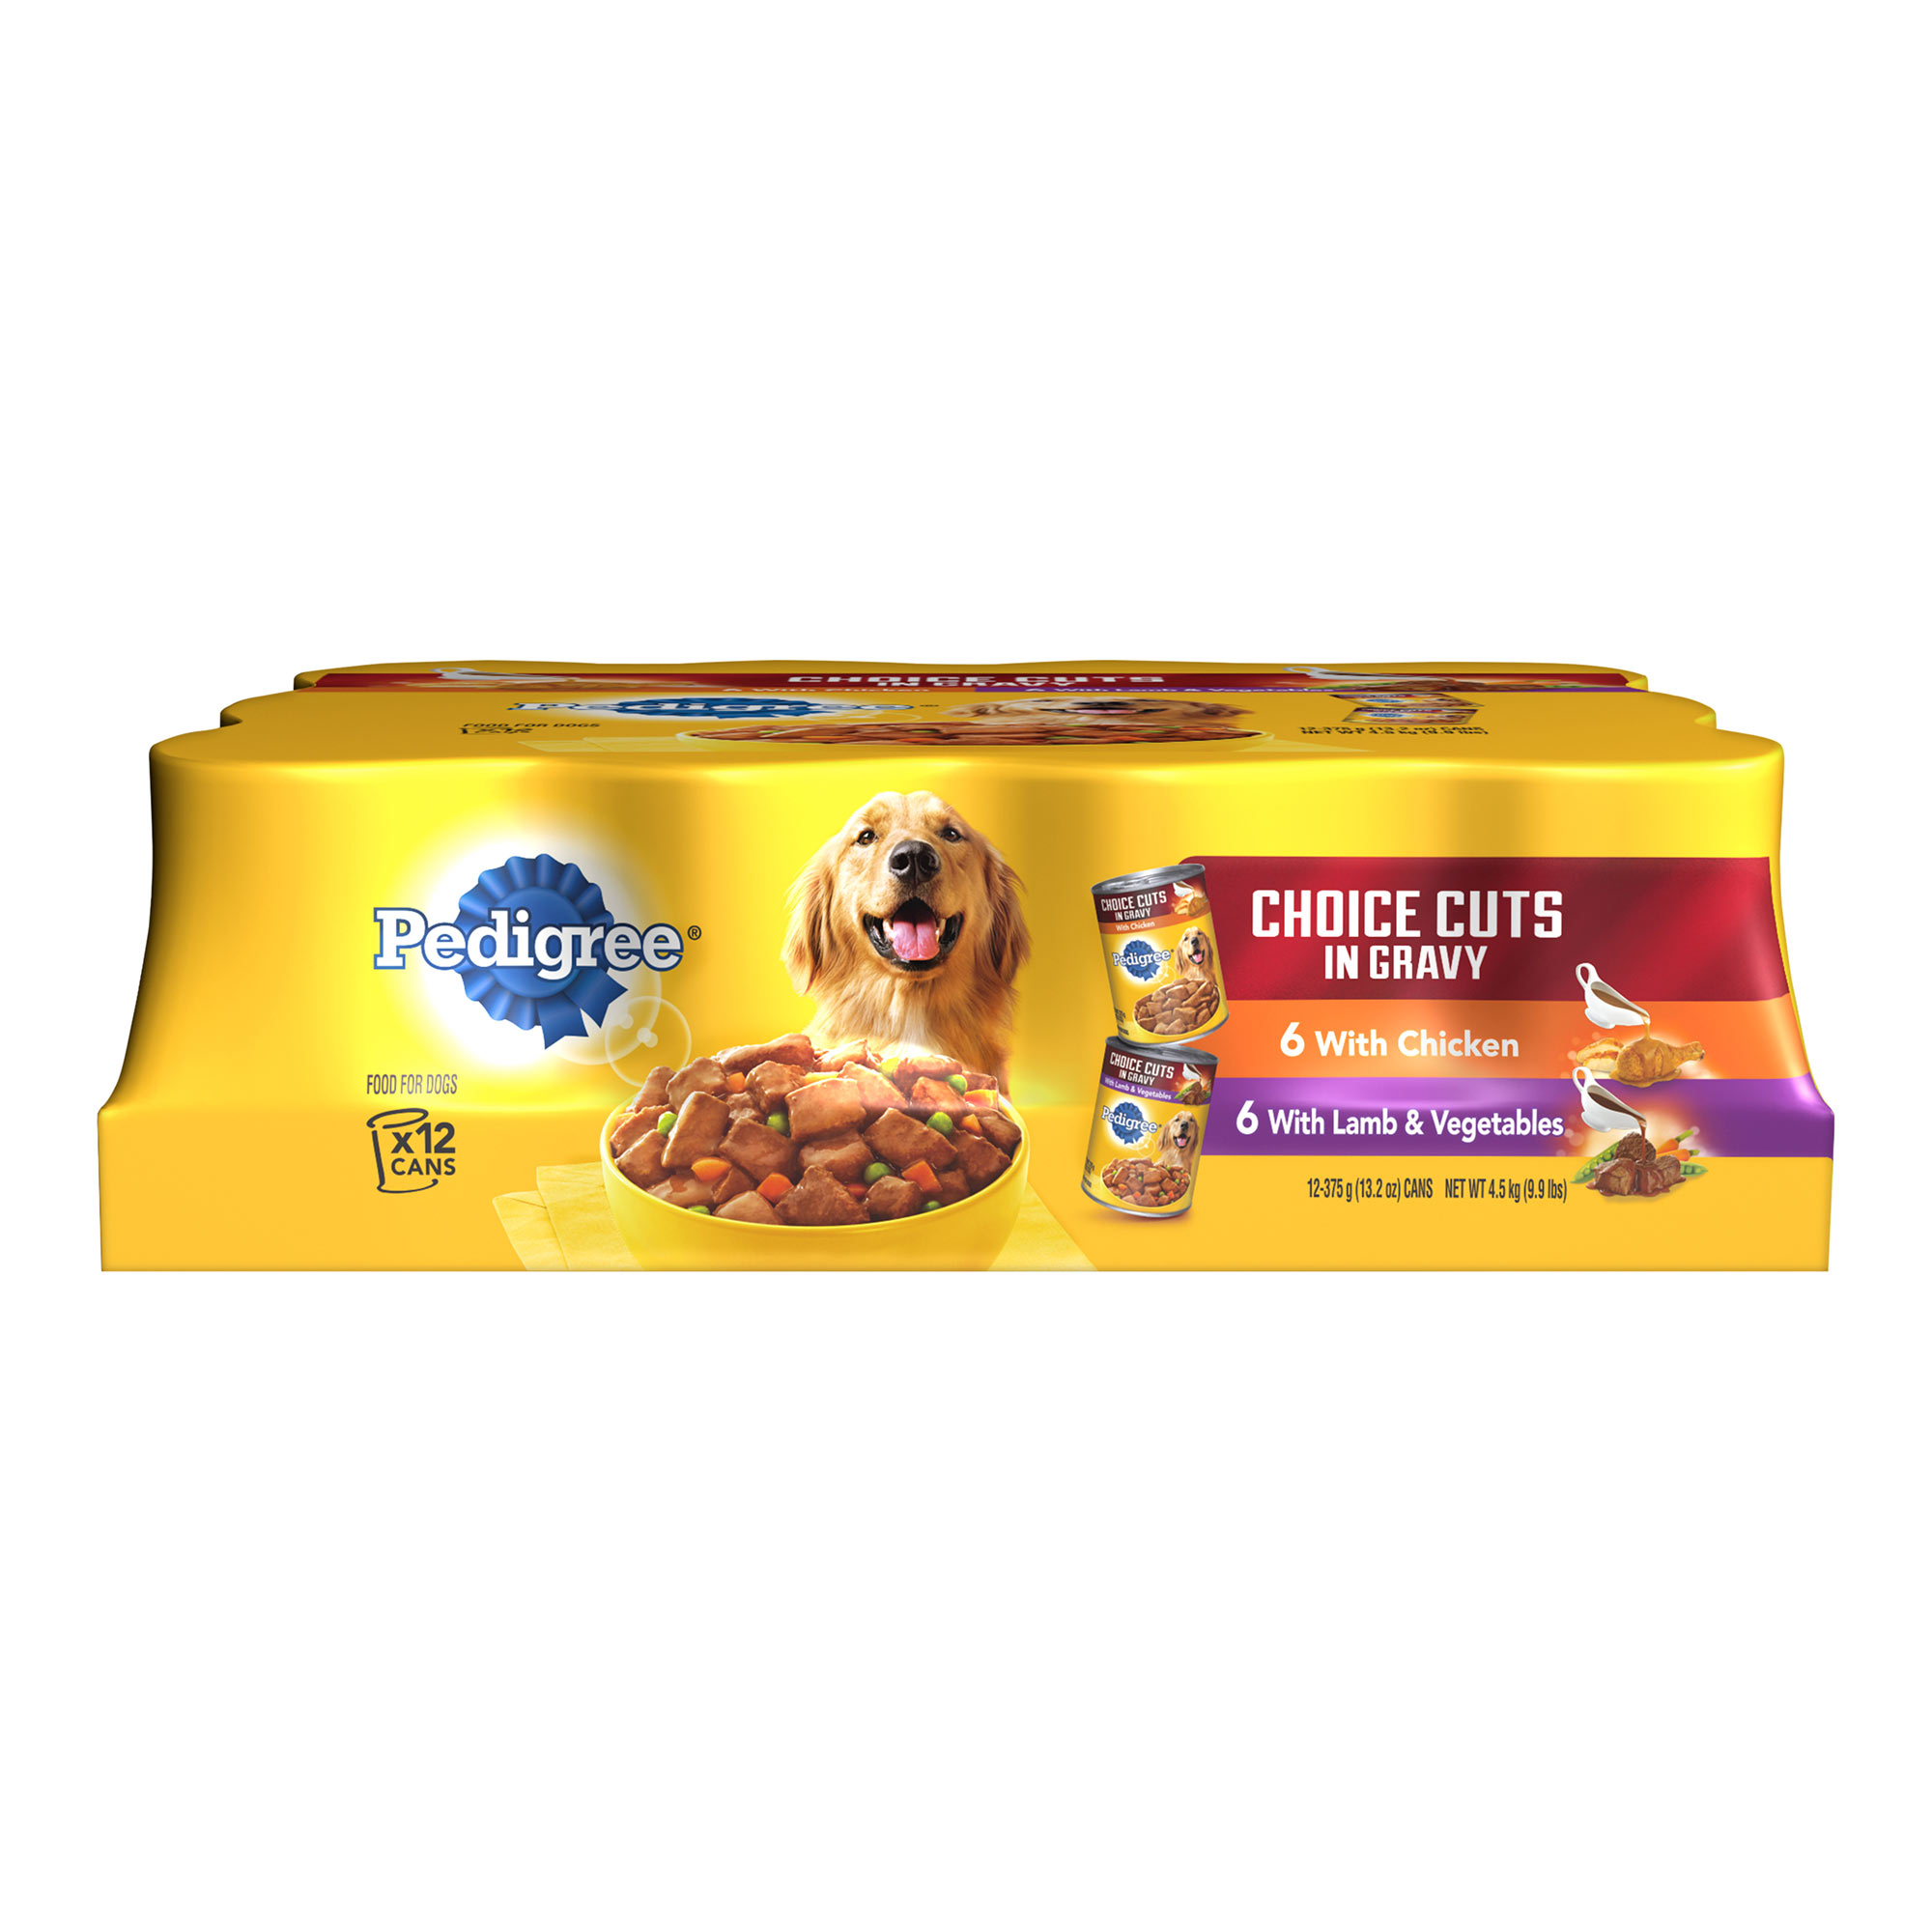 (12 Pack) Pedigree Choice Cuts In Gravy Variety Pack Chicken And Lamb Wet Dog Food, 13.2 Oz - image 1 of 5